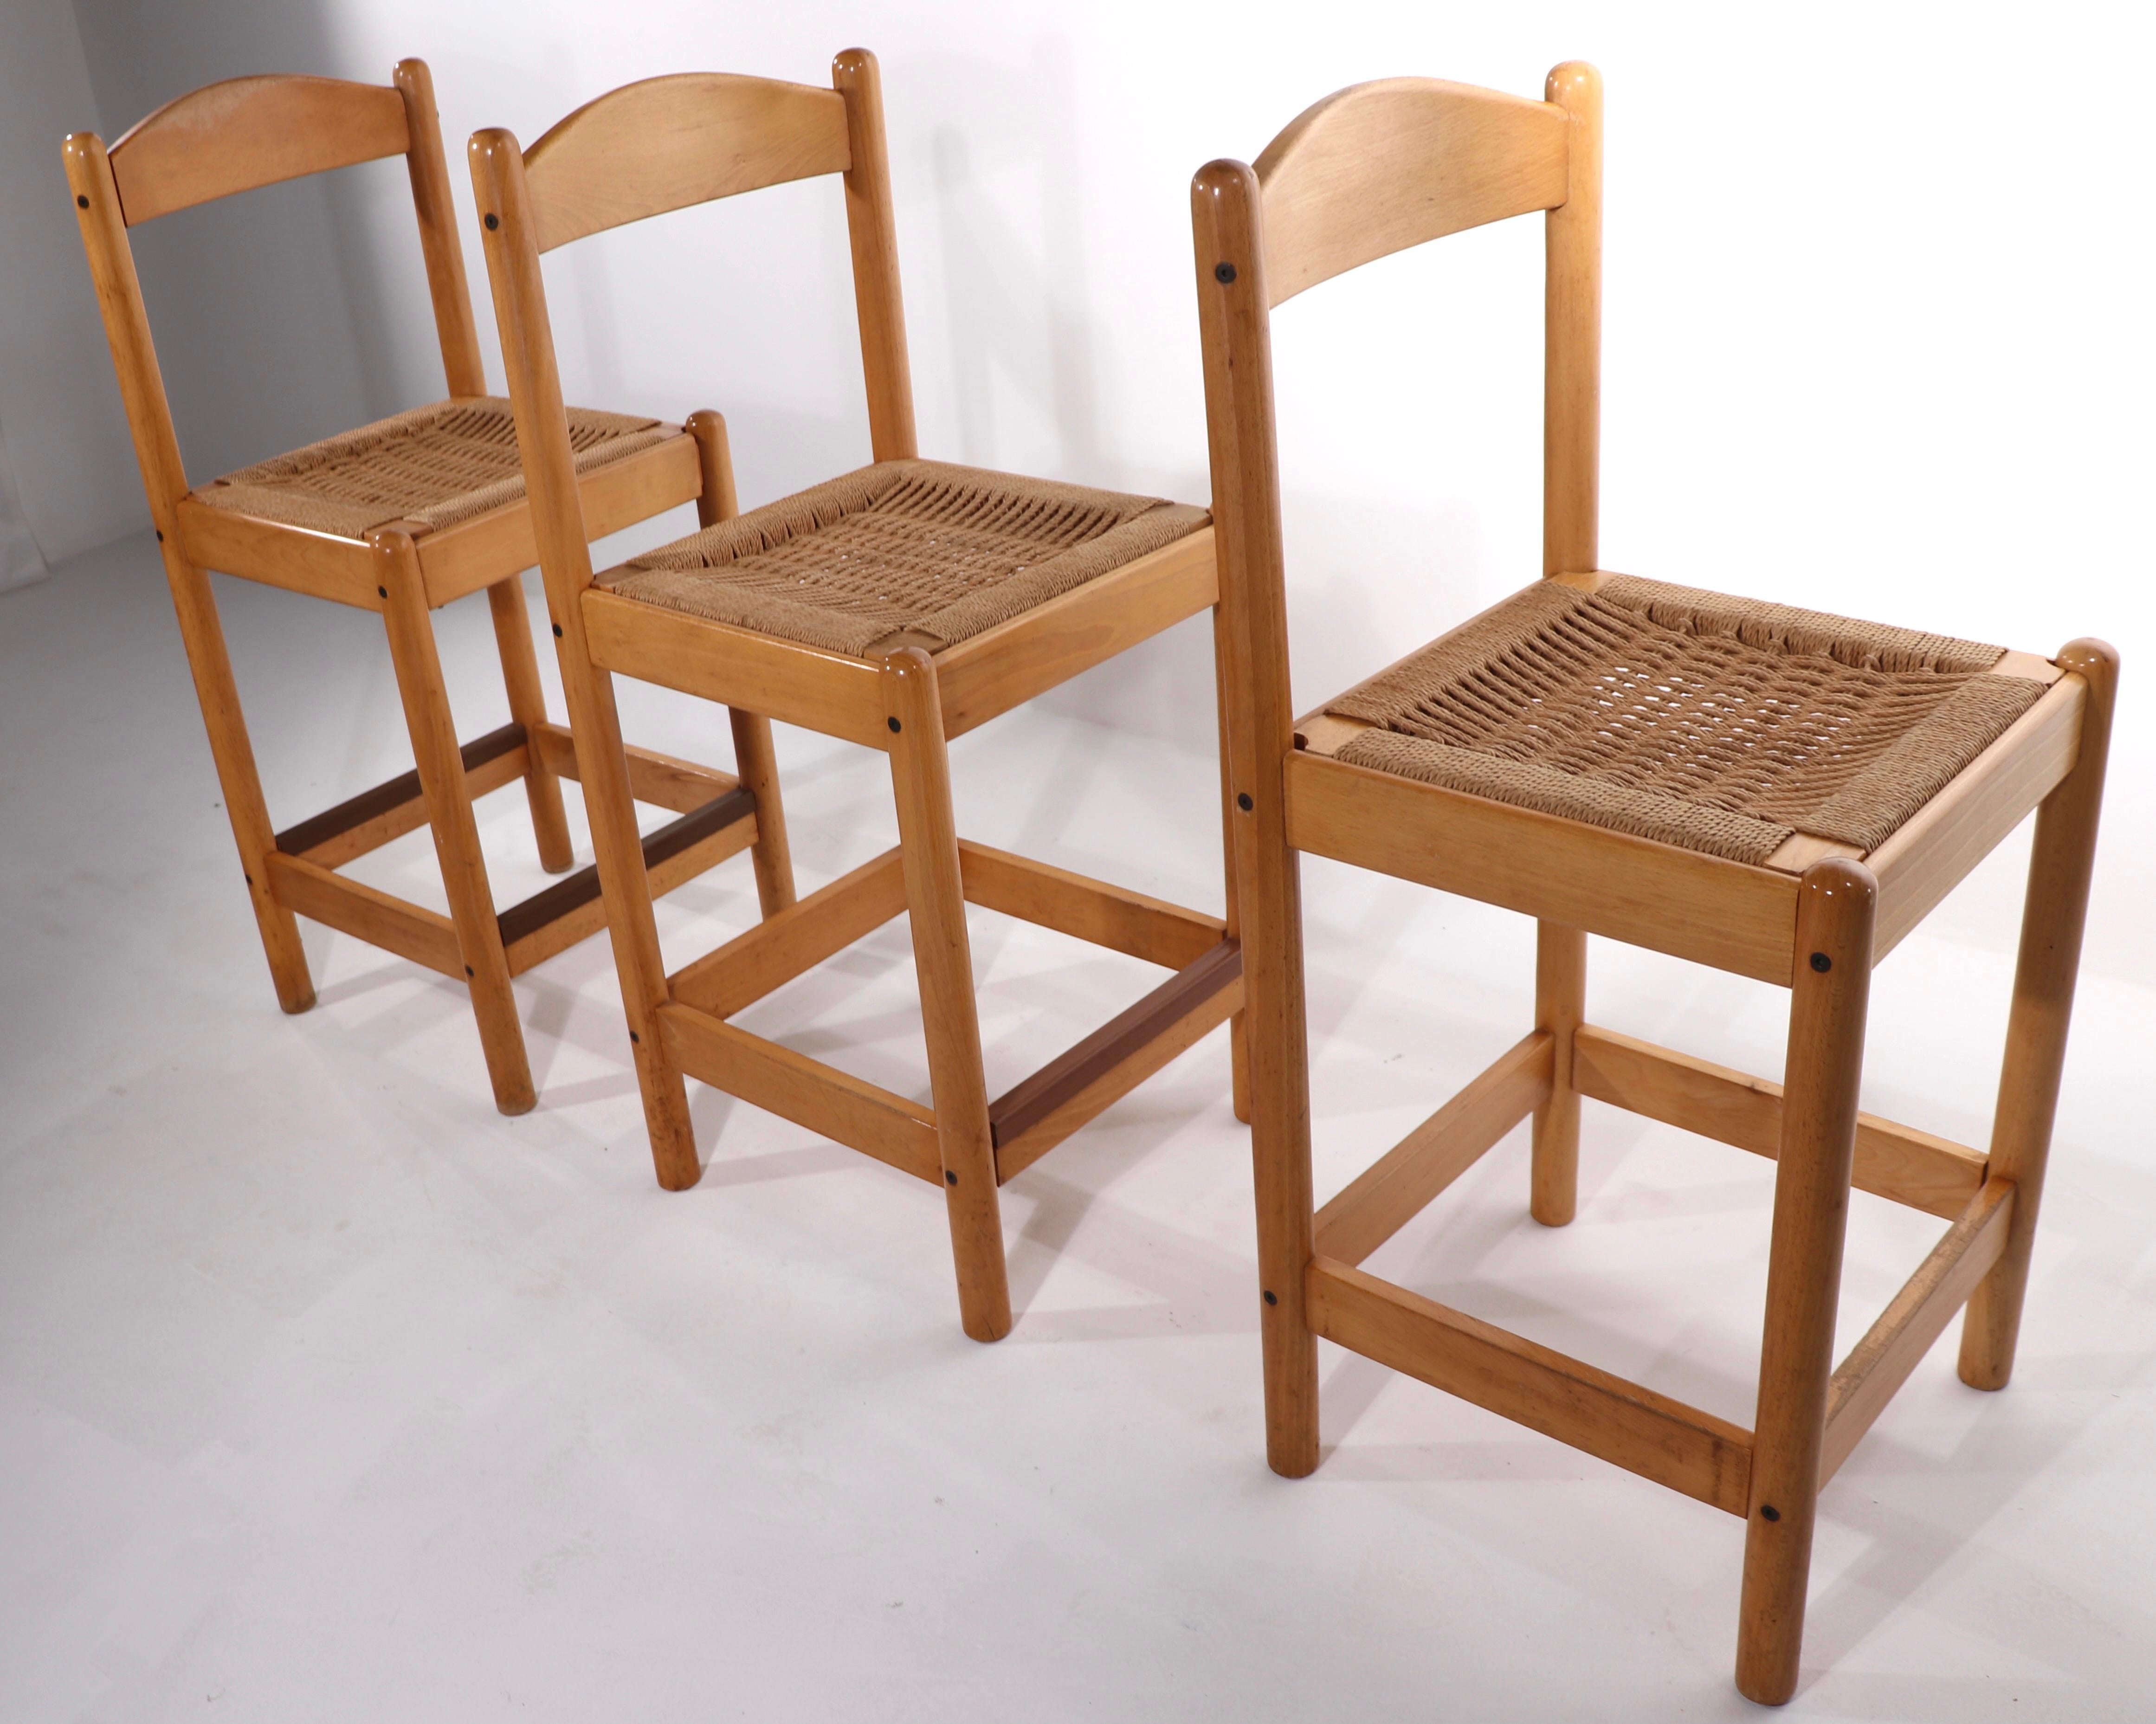 3 Post Modern Blonde Beechwood Stools Made in Italy 4